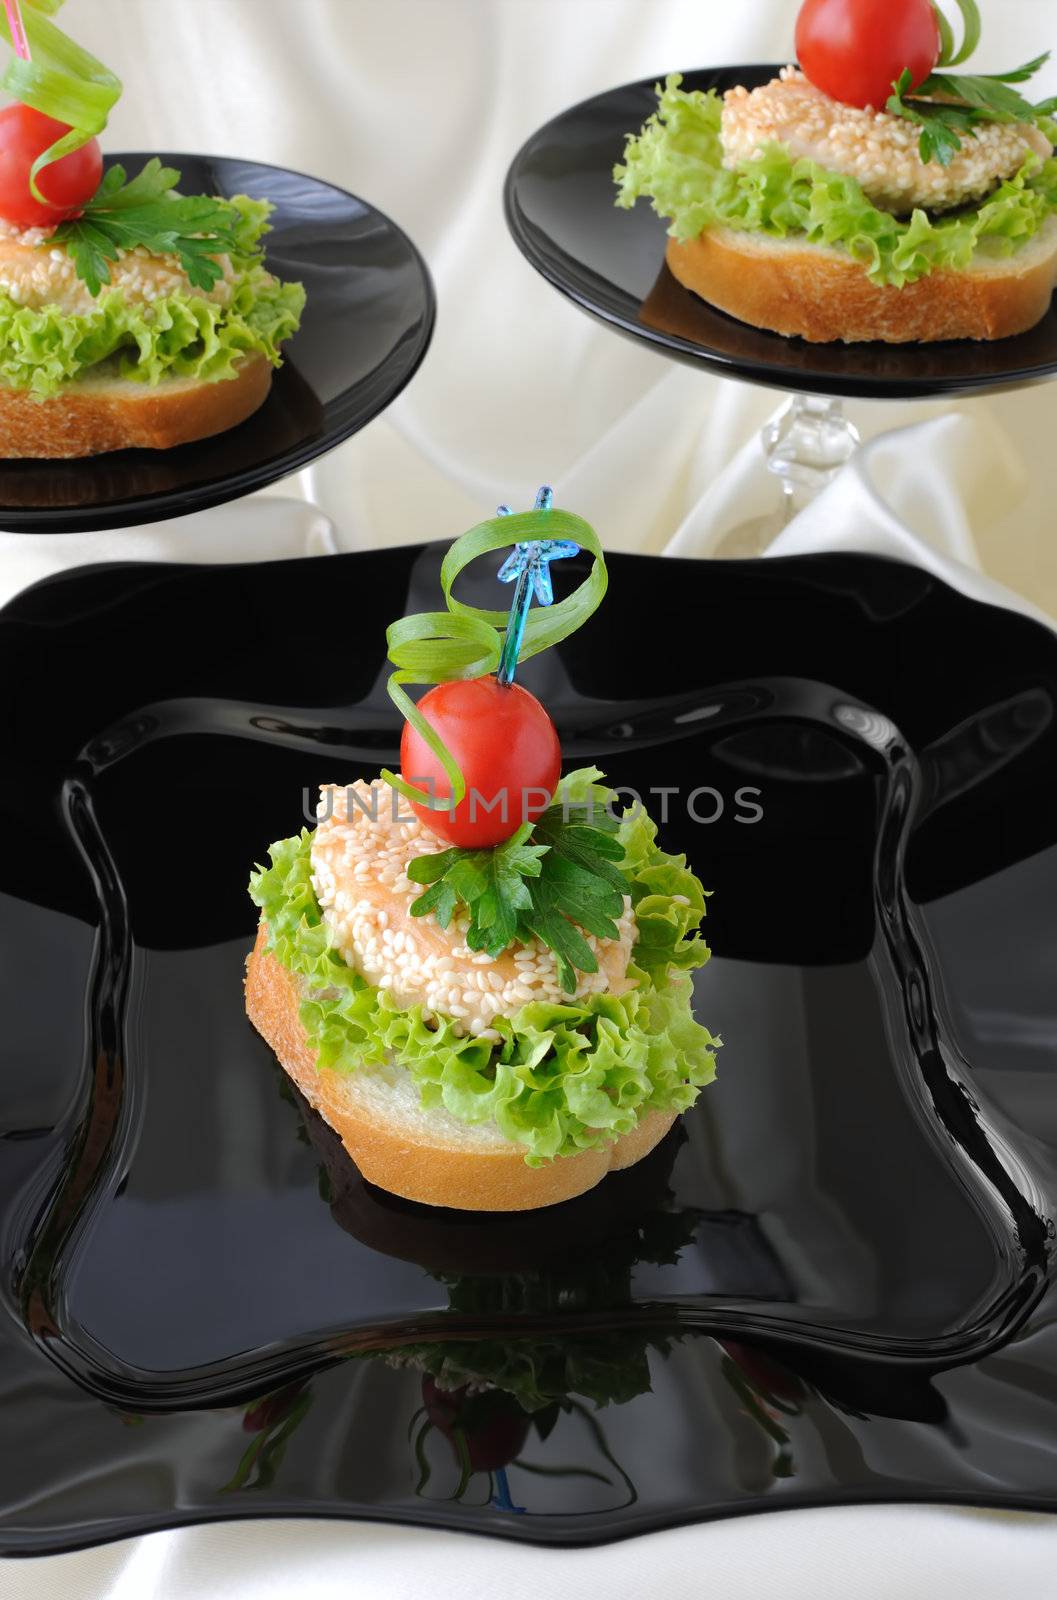 Mini sandwiches (canapés) with chicken in sesame